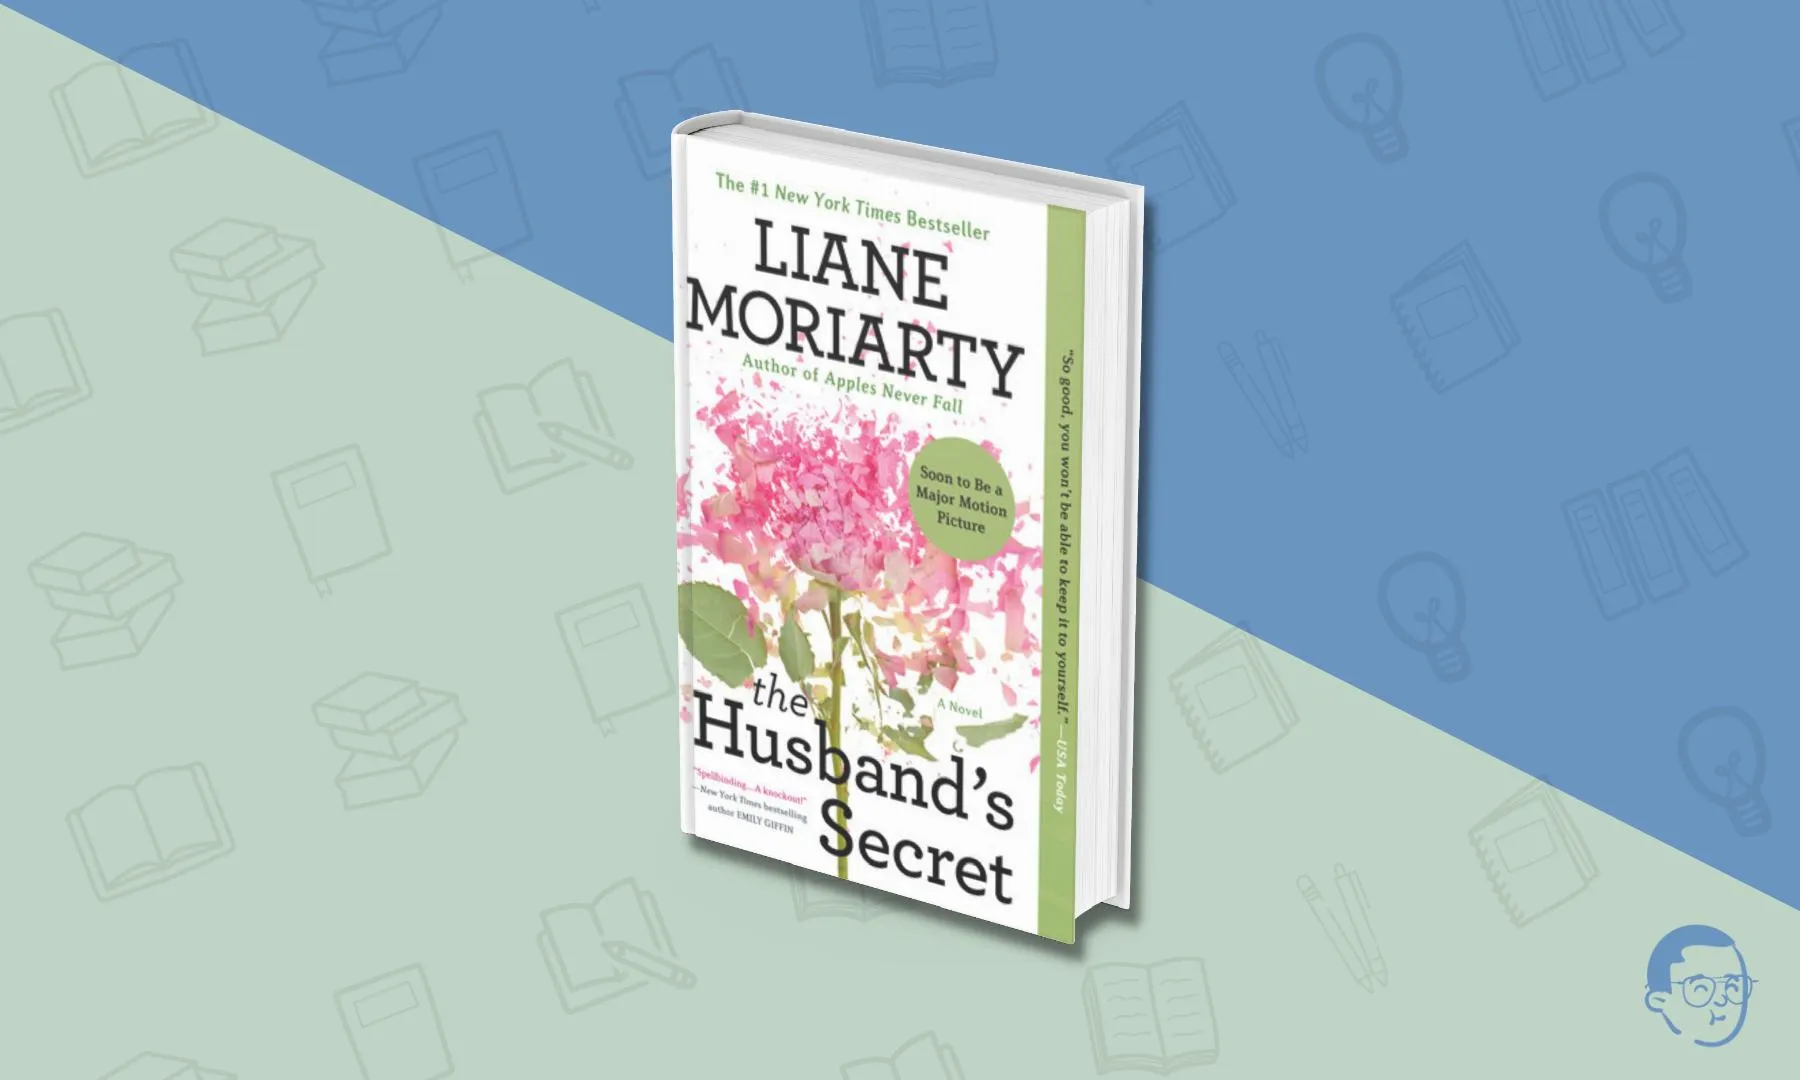 The Husbands Secret by Lianne Moriarty